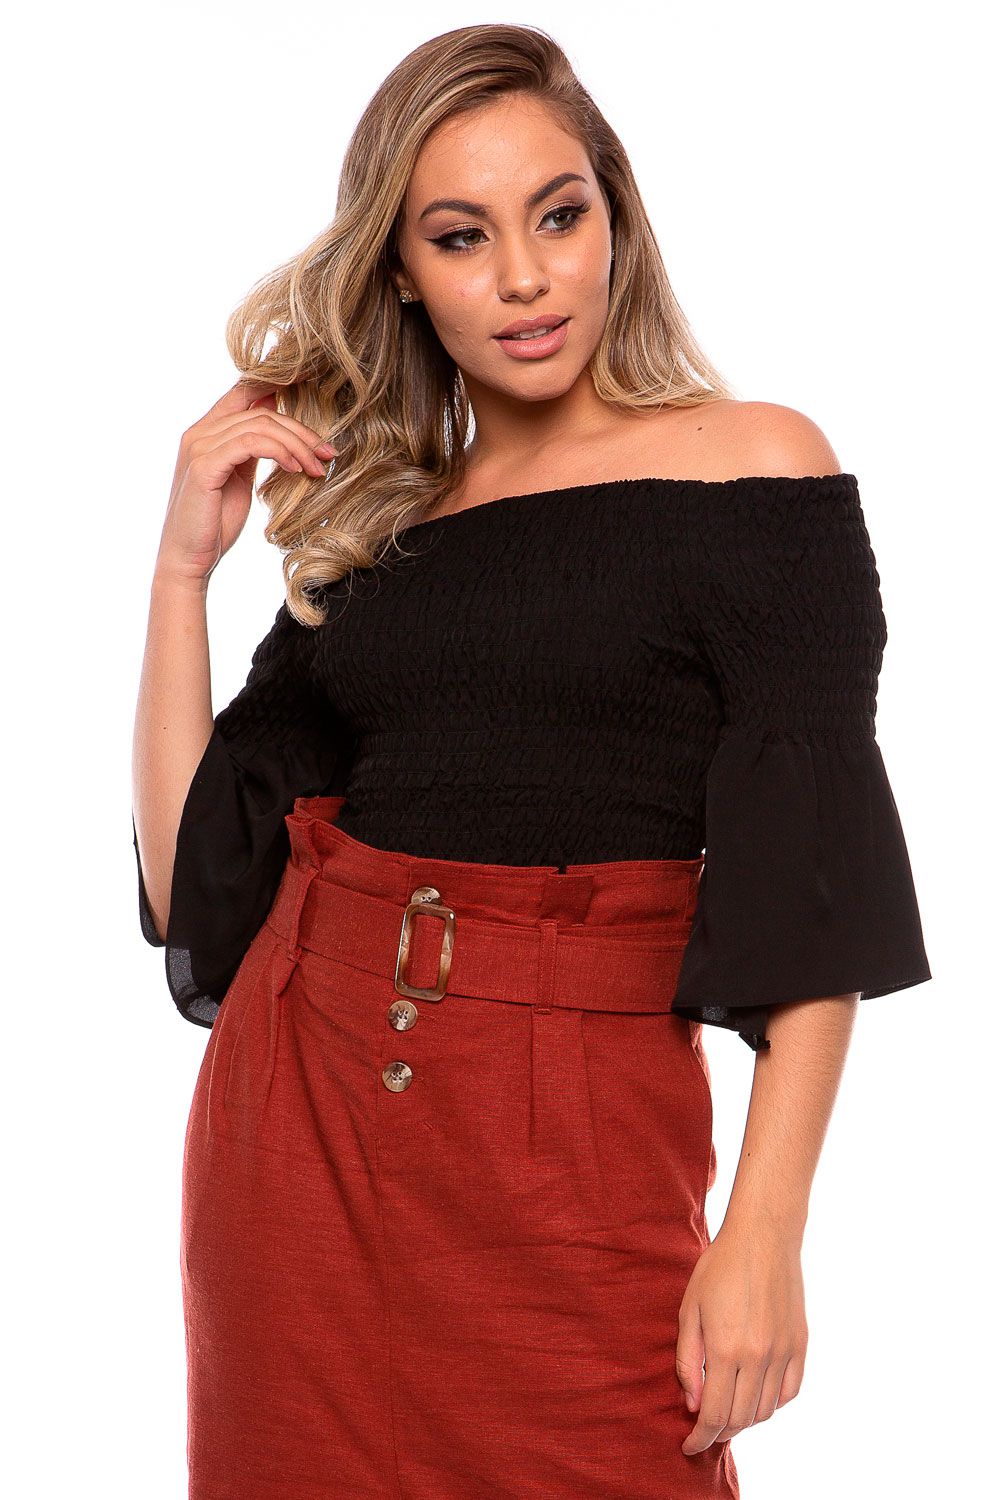 Sabrina Skirt with Inner Shorts - Red